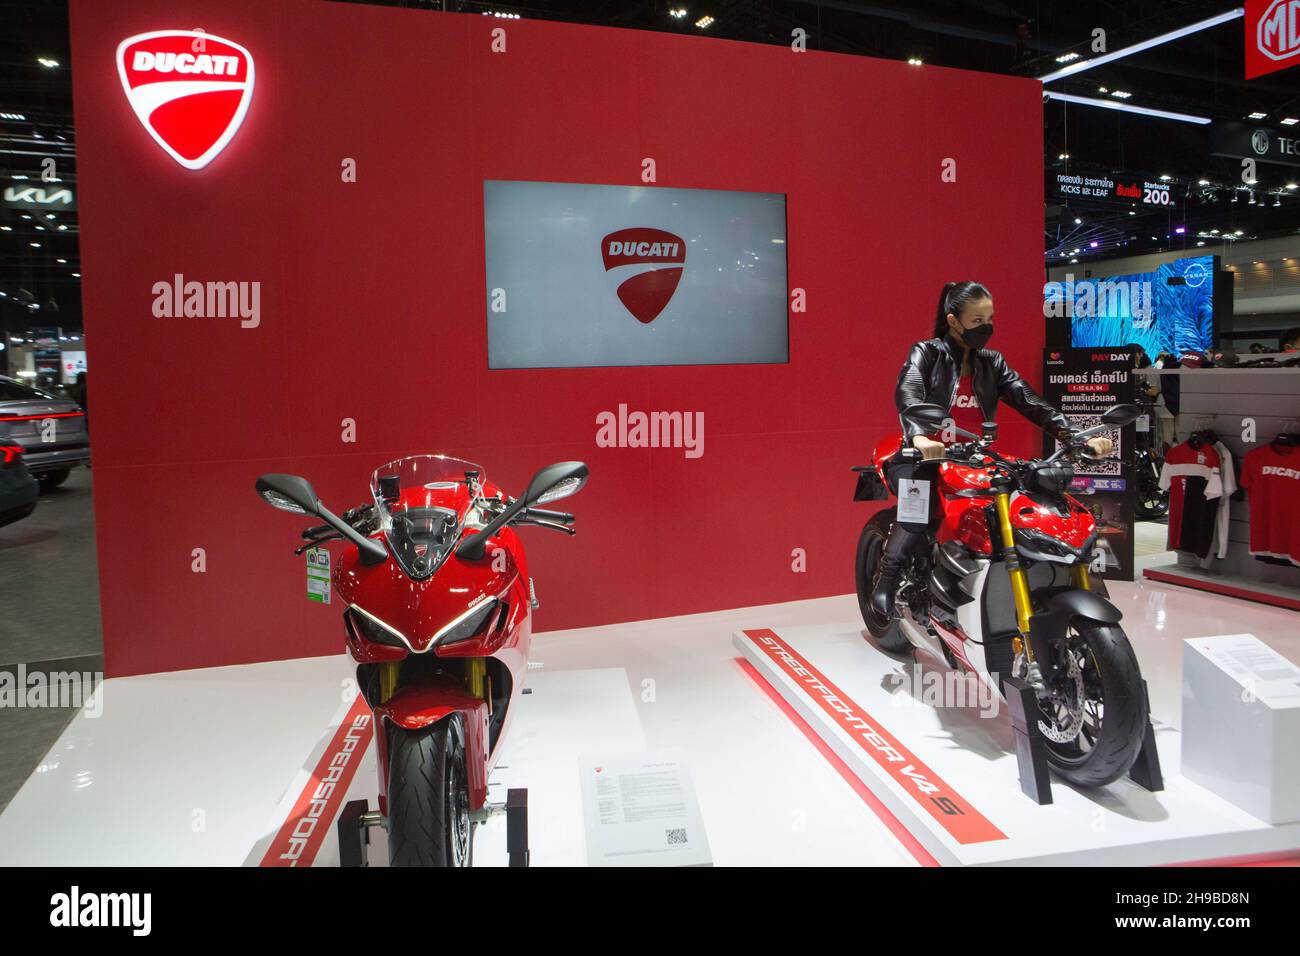 IV. Ducati's Impact on the Sport Motorcycle Industry